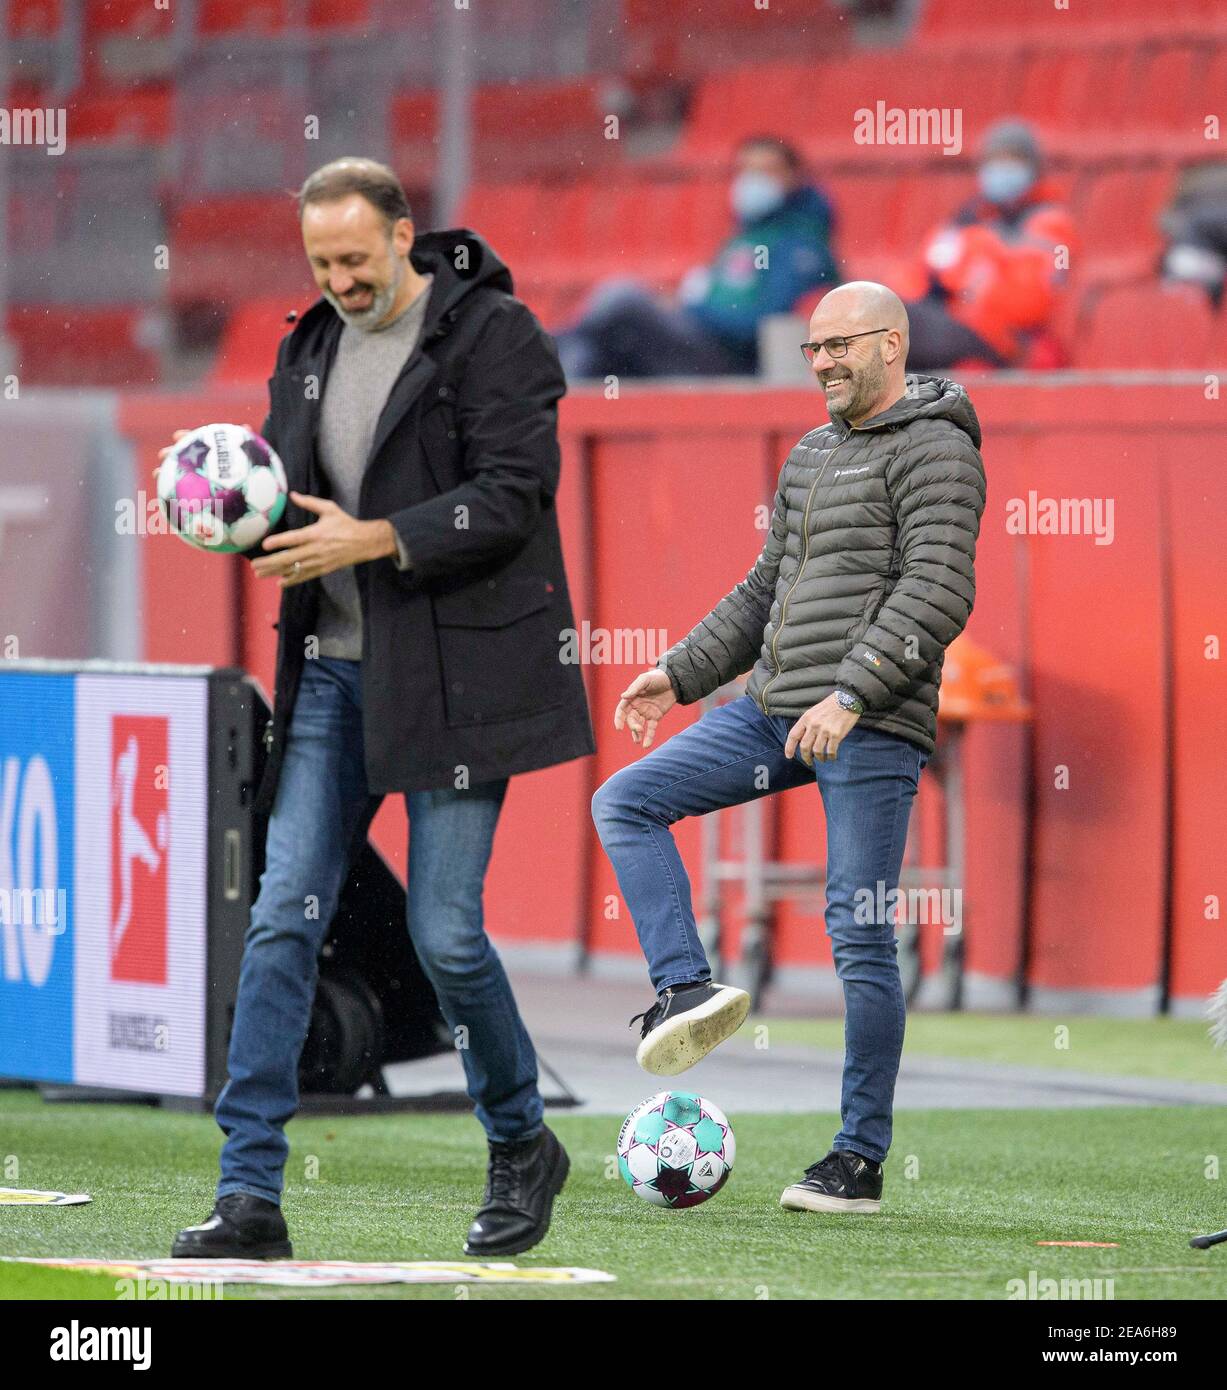 coach Peter BOSZ r. (LEV) and coach Pellegrino MATARAZZO (S) laughs together about a strange situation Soccer 1. Bundesliga, 20th matchday, Bayer 04 Leverkusen (LEV) - VfB Stuttgart (S) 5: 2, on February 6th, 2021 in Leverkusen/Germany. ¬ | usage worldwide Stock Photo